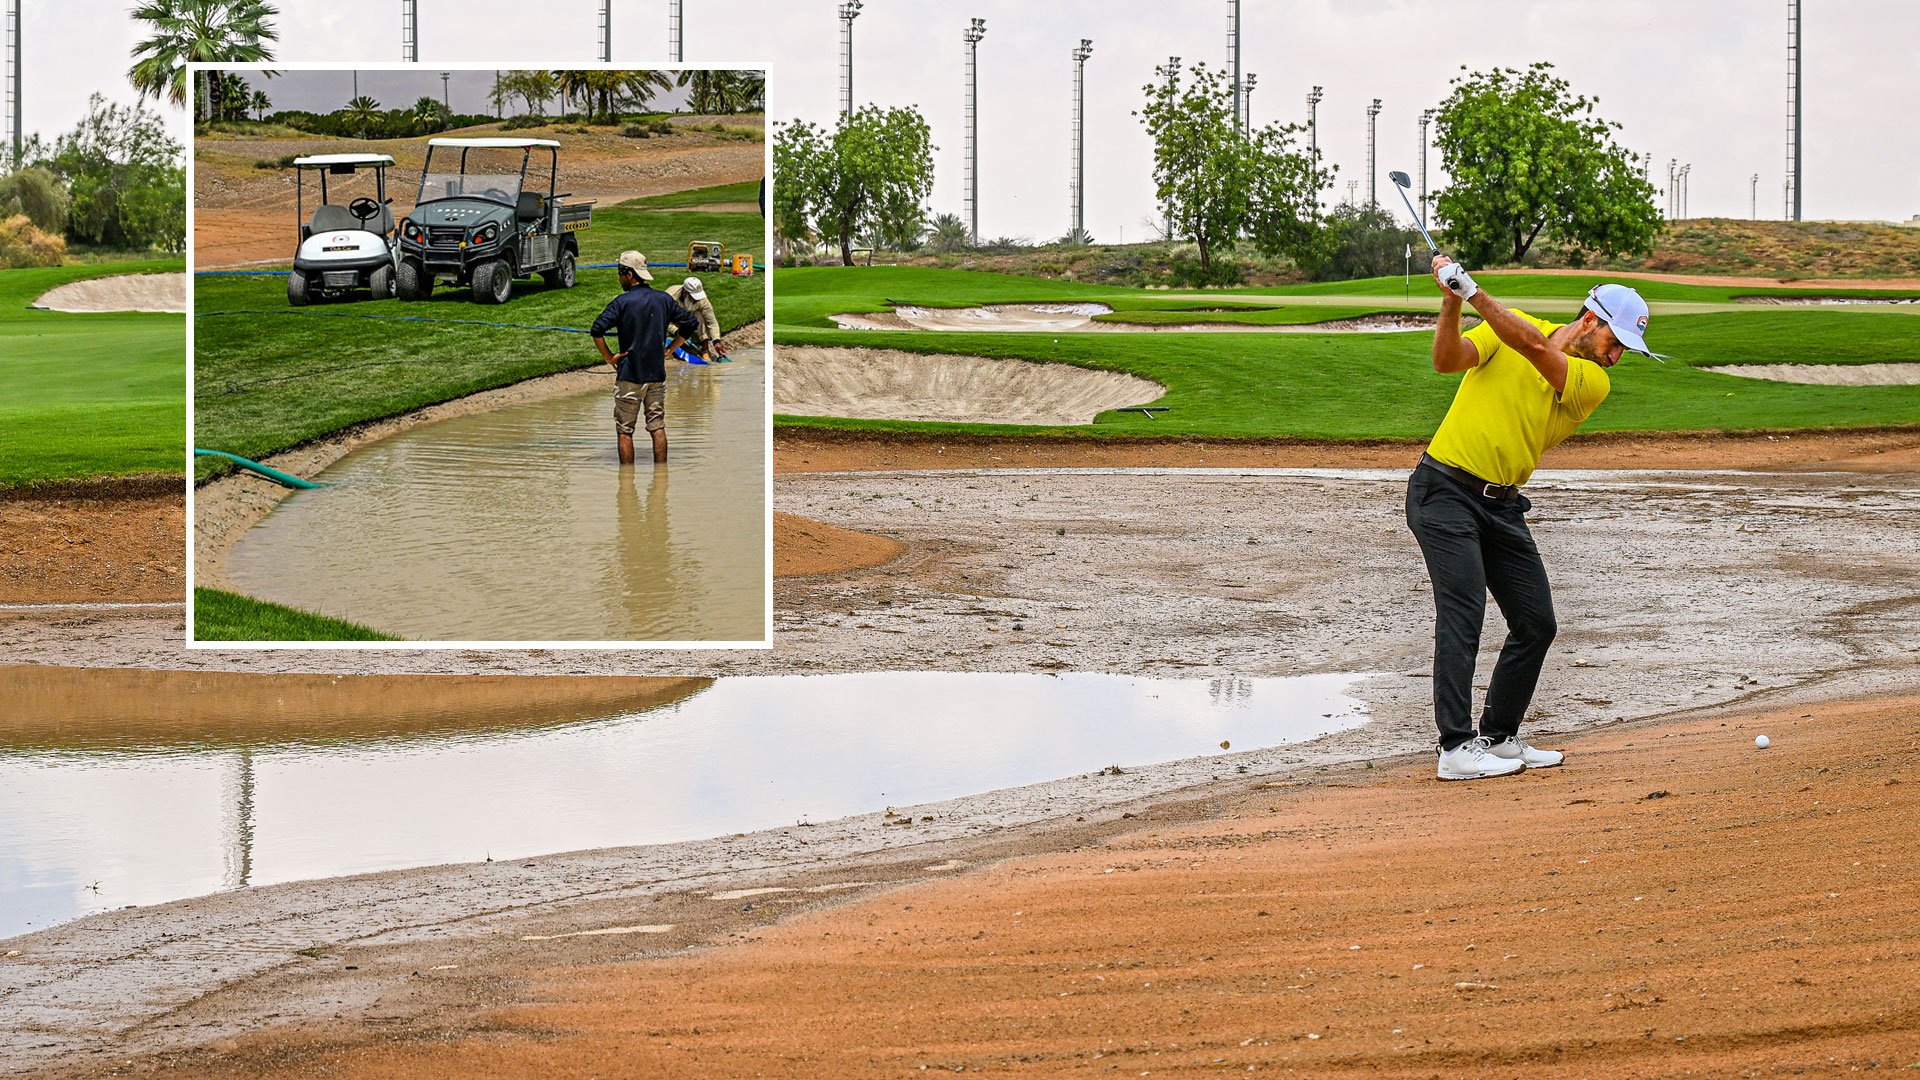 Top golf course flooded with bunkers completely underwater in incredible pics just a day before professional tour event